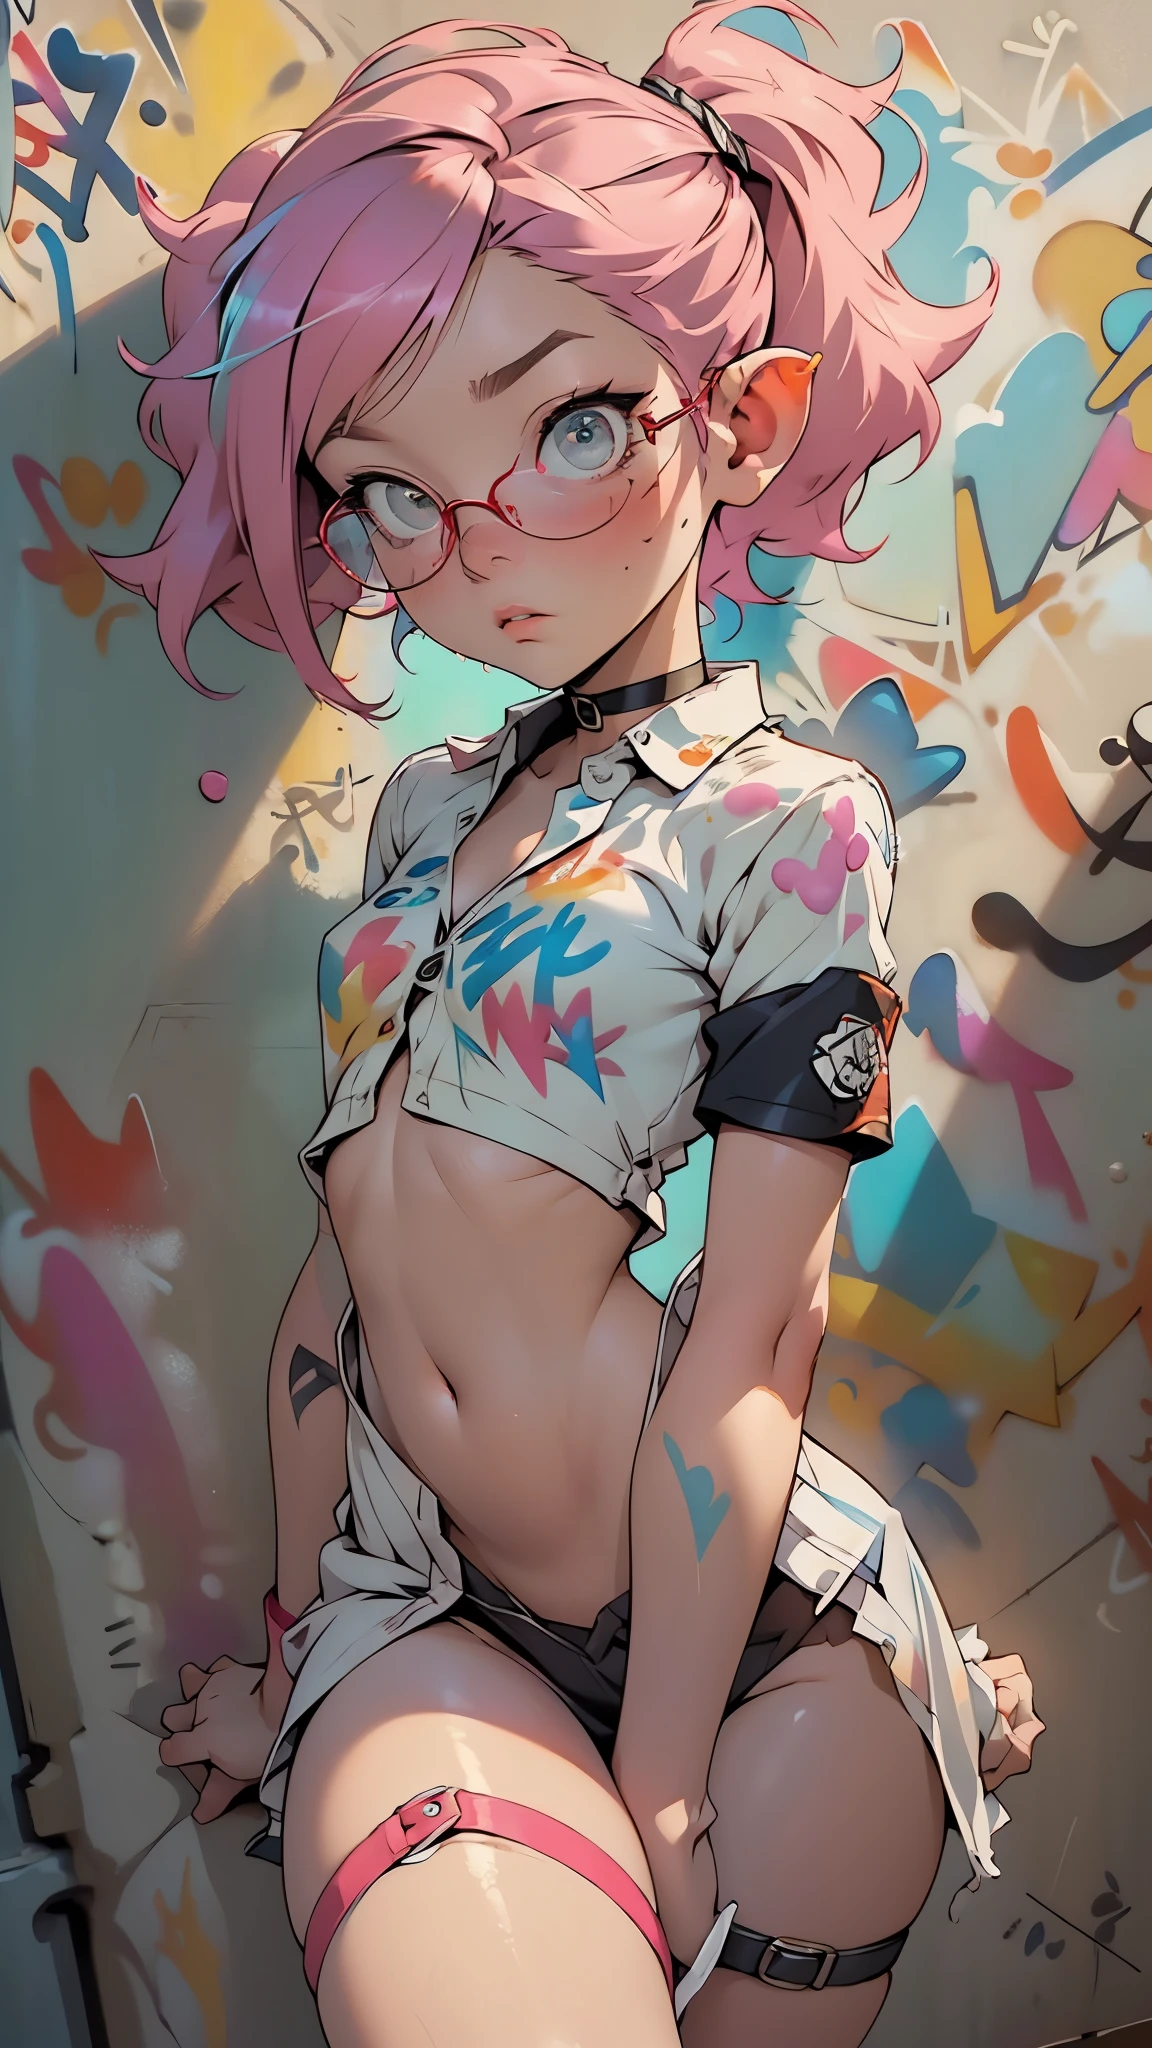 choker, (graffiti:1.5), paint splatter, arms behind back, against wall, looking at viewer, armband, thigh strap, paint on body, pink wing, head tilt, bored, multicolored hair, headset,slim body pink polkadot bubble design, psycho, cool pose, left crab arms, zooble, cool sit pose, abstract triangular shapes, clown vibe, no emotion, no sooul,Masterpiece, Best quality, 8K, Cinematic light,tchibi, 1girl,full bodyesbian,Russian,extra very short hair, ((rainbow hair)), ((micro thong)), ((aqua eyes)), intricate eyes,beautiful detailed eyes,symmetrical eyes,ponytail,(pointed ears),round frame glasses,wide hips,Pouting expression, cute, ((thigh_strap)),anime girl,(((liquid paint hair:1.1))), lustrous skin:1.5,bright skin: 1.5,skin tanned,shiny skin,very shiny skin,shiny body,illuminated skin,wet skin,long pigtails, twin pigtails, school girl skirt, open shirt, unbuttoned shirt, shirt unbuttoned and open exposed breasts, embarrassed, chest out, exposing breasts, bare legs, long legs, thick legs, tiny frame, small breasts, breasts out, showing, tiny uniform, shown, embarrassed expression, tsundere, breasts out, breasts exposed, navel, flashing, grabbing shirt open, grabbing shirt open to expose breasts, both hands gripping shirt, hands gripping shirt, grabbing shirt apart

(nsfw:0.55), ((flat chested, flat stomach, baby face)), (intense colors),